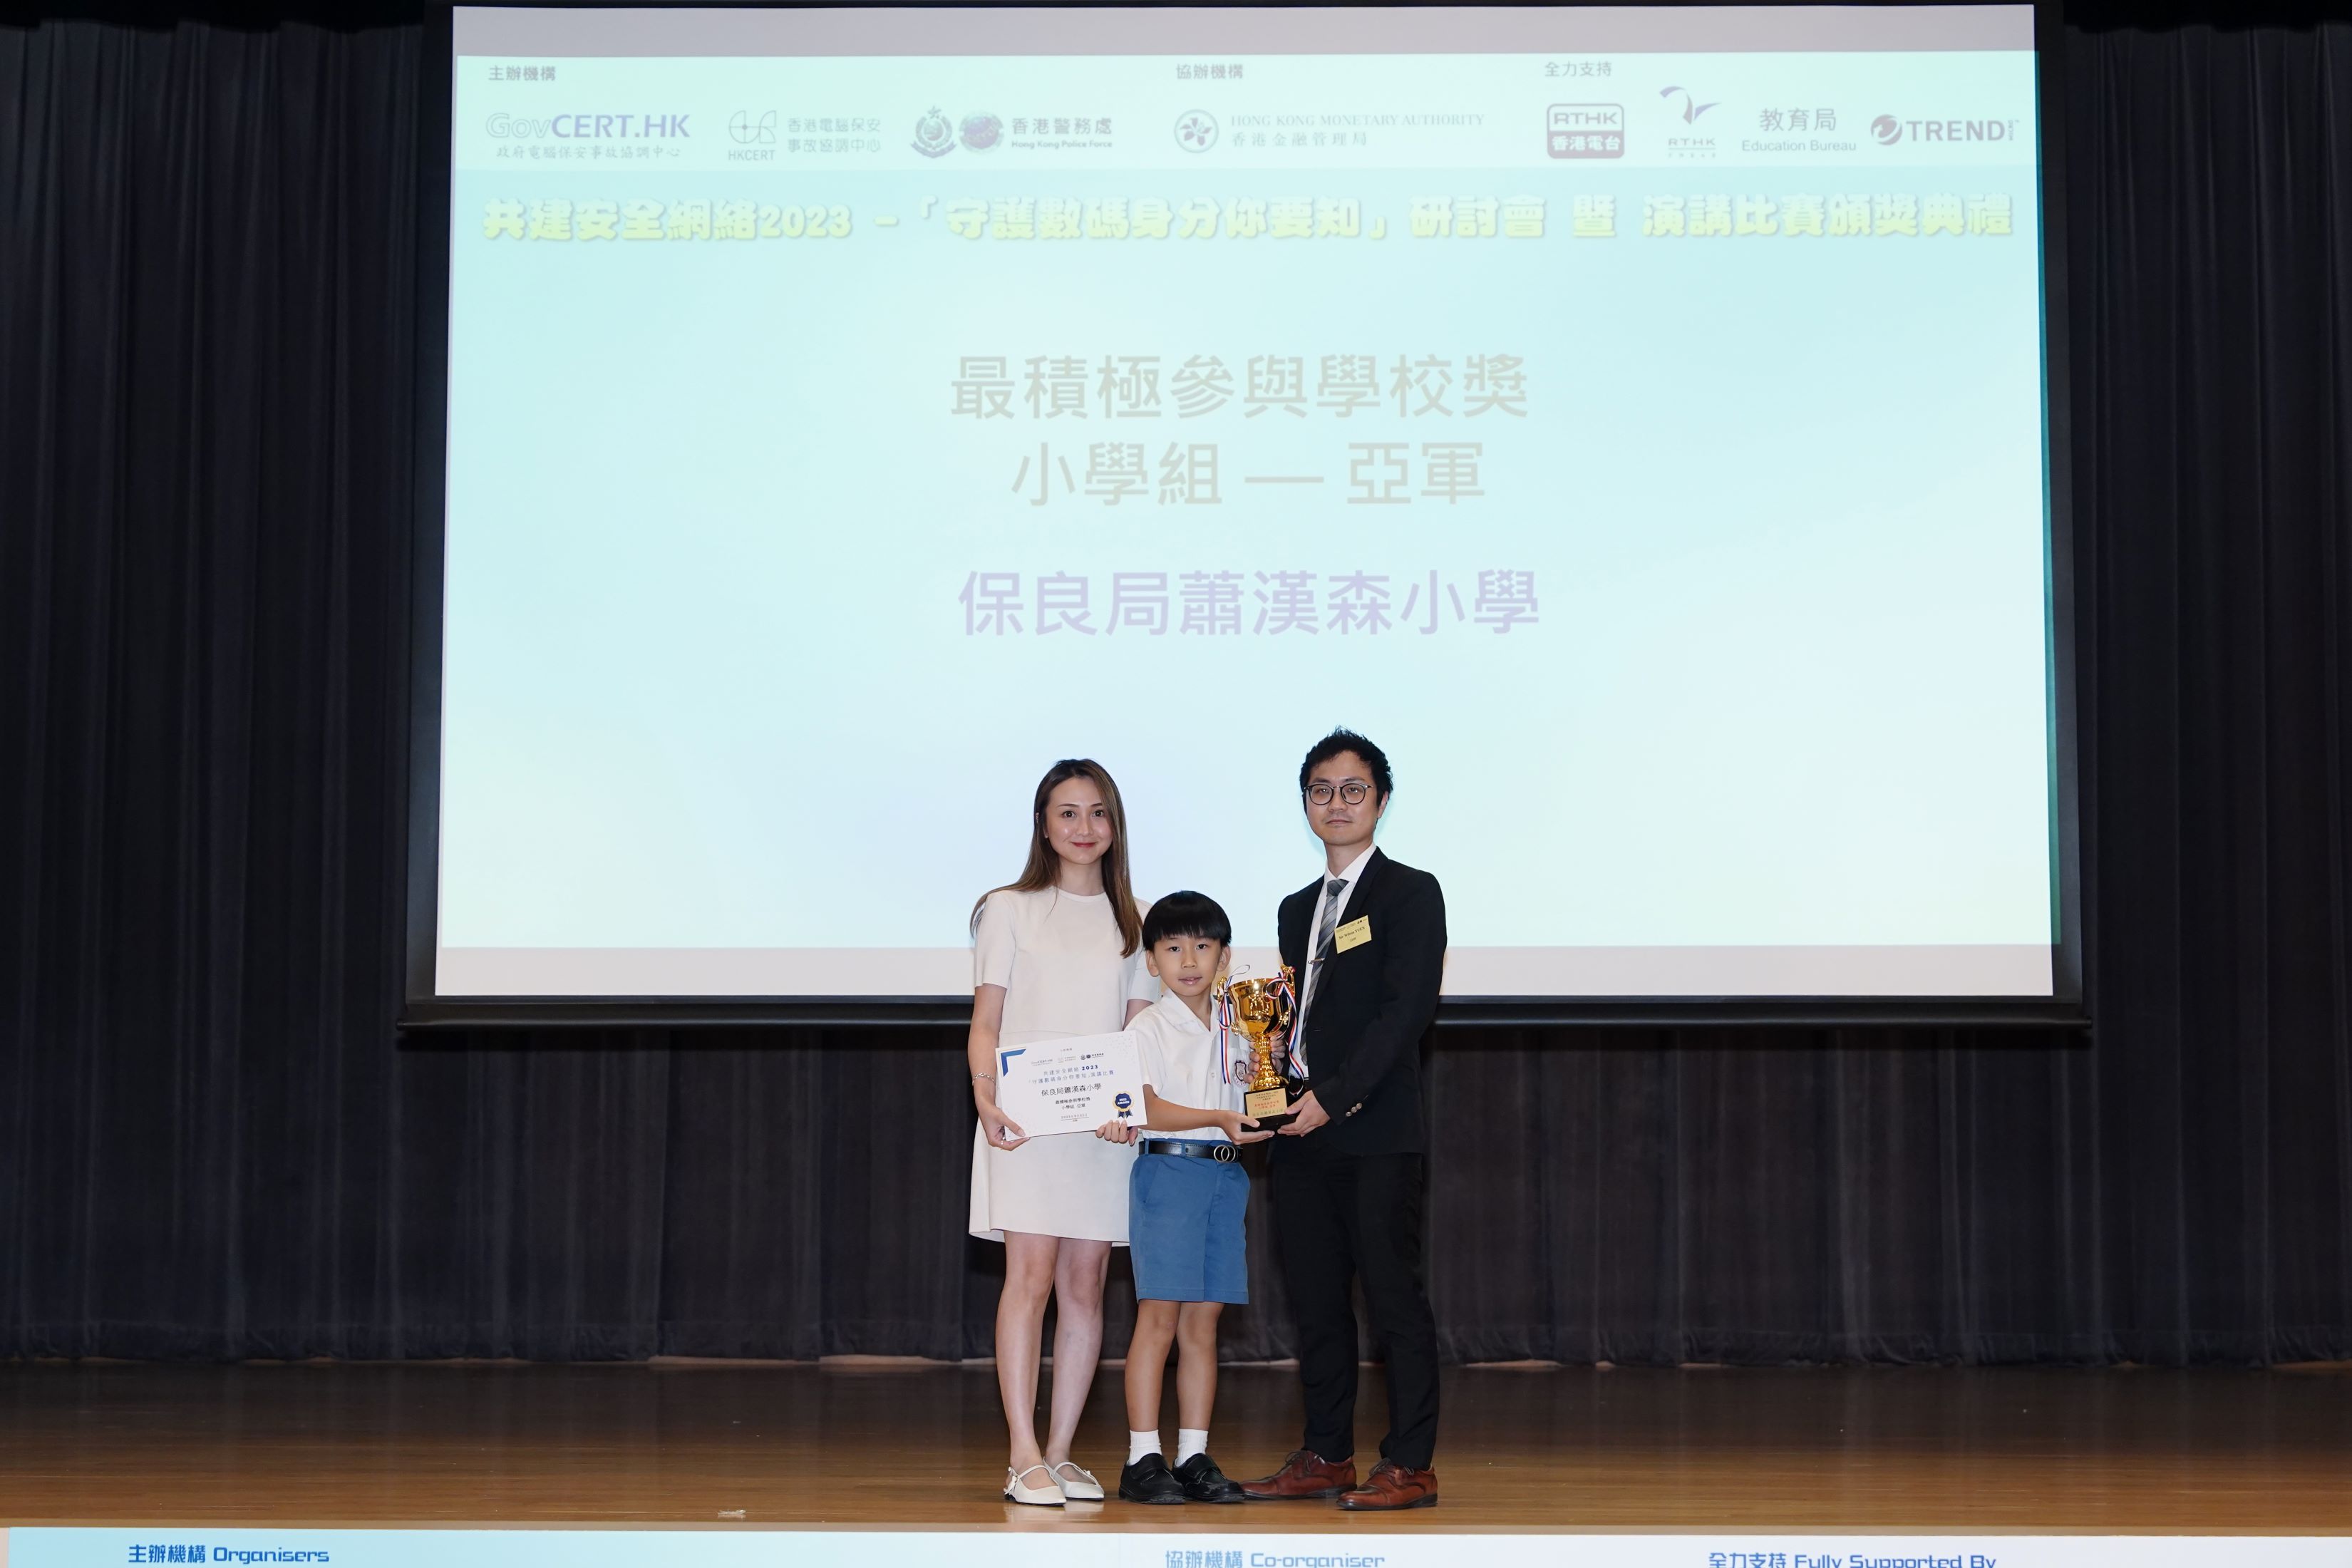 1st Runner-up of Most Supportive School Award (Primary School Category) - Po Leung Kuk Siu Hon Sum Primary School